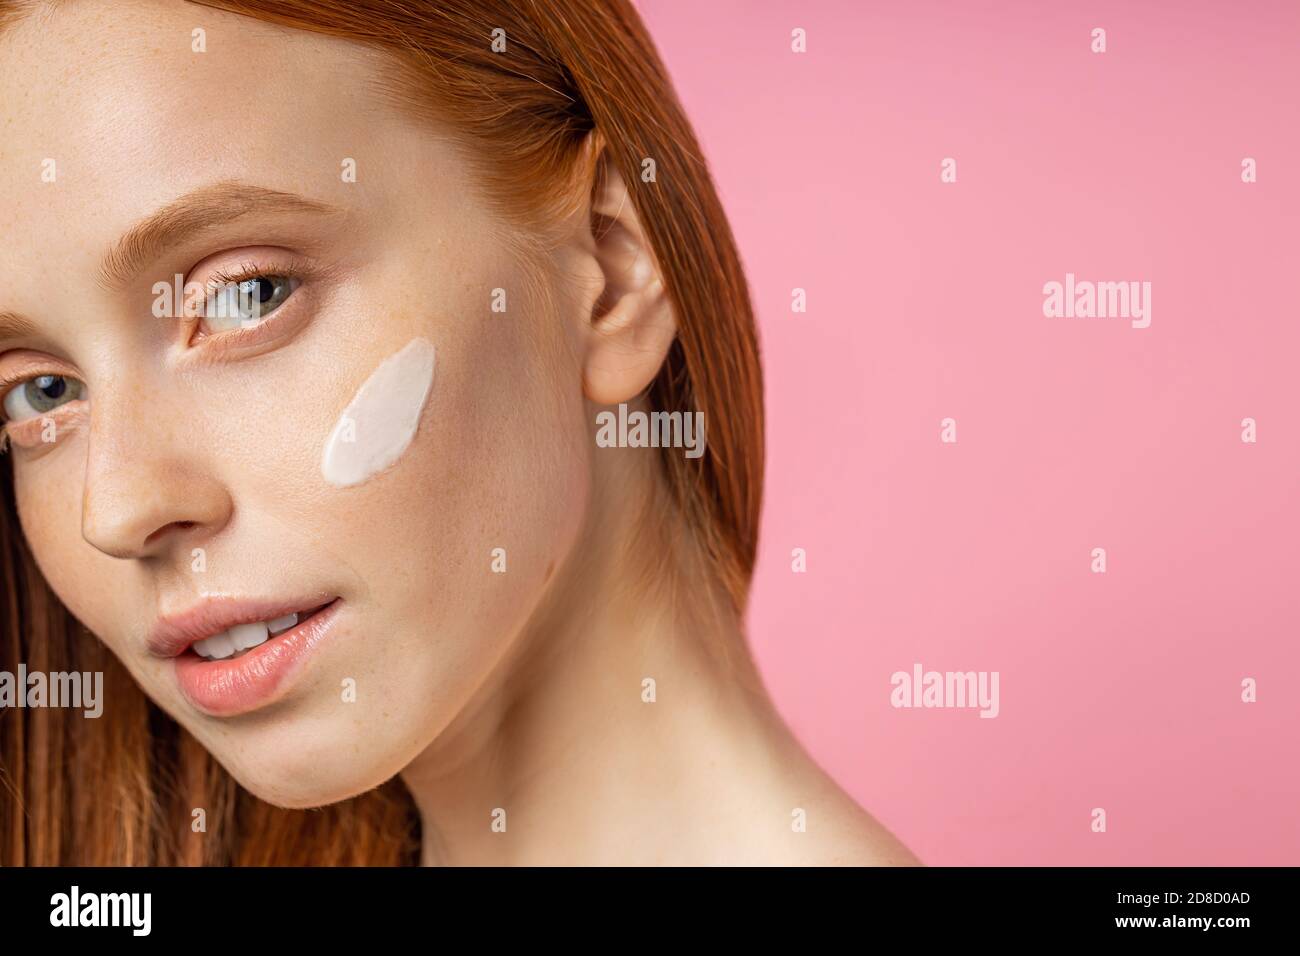 Cropped close up portrait of young woman with cream on cheek. Charming caucasian girl with red hair, fresh freckled skin, smiling happily standing aga Stock Photo